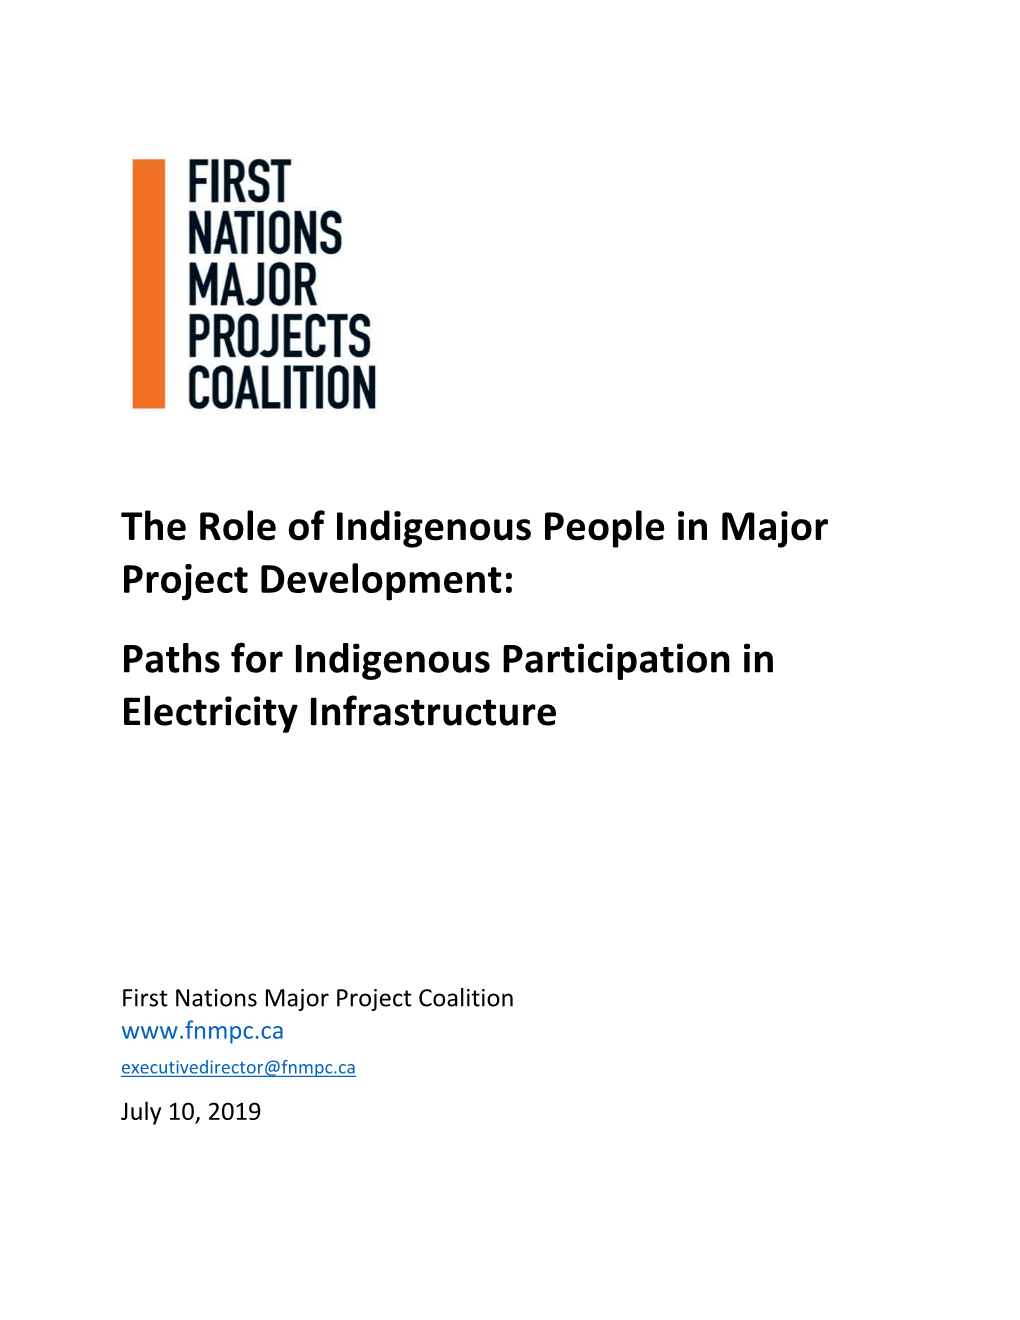 Paths for Indigenous Participation in Electricity Infrastructure